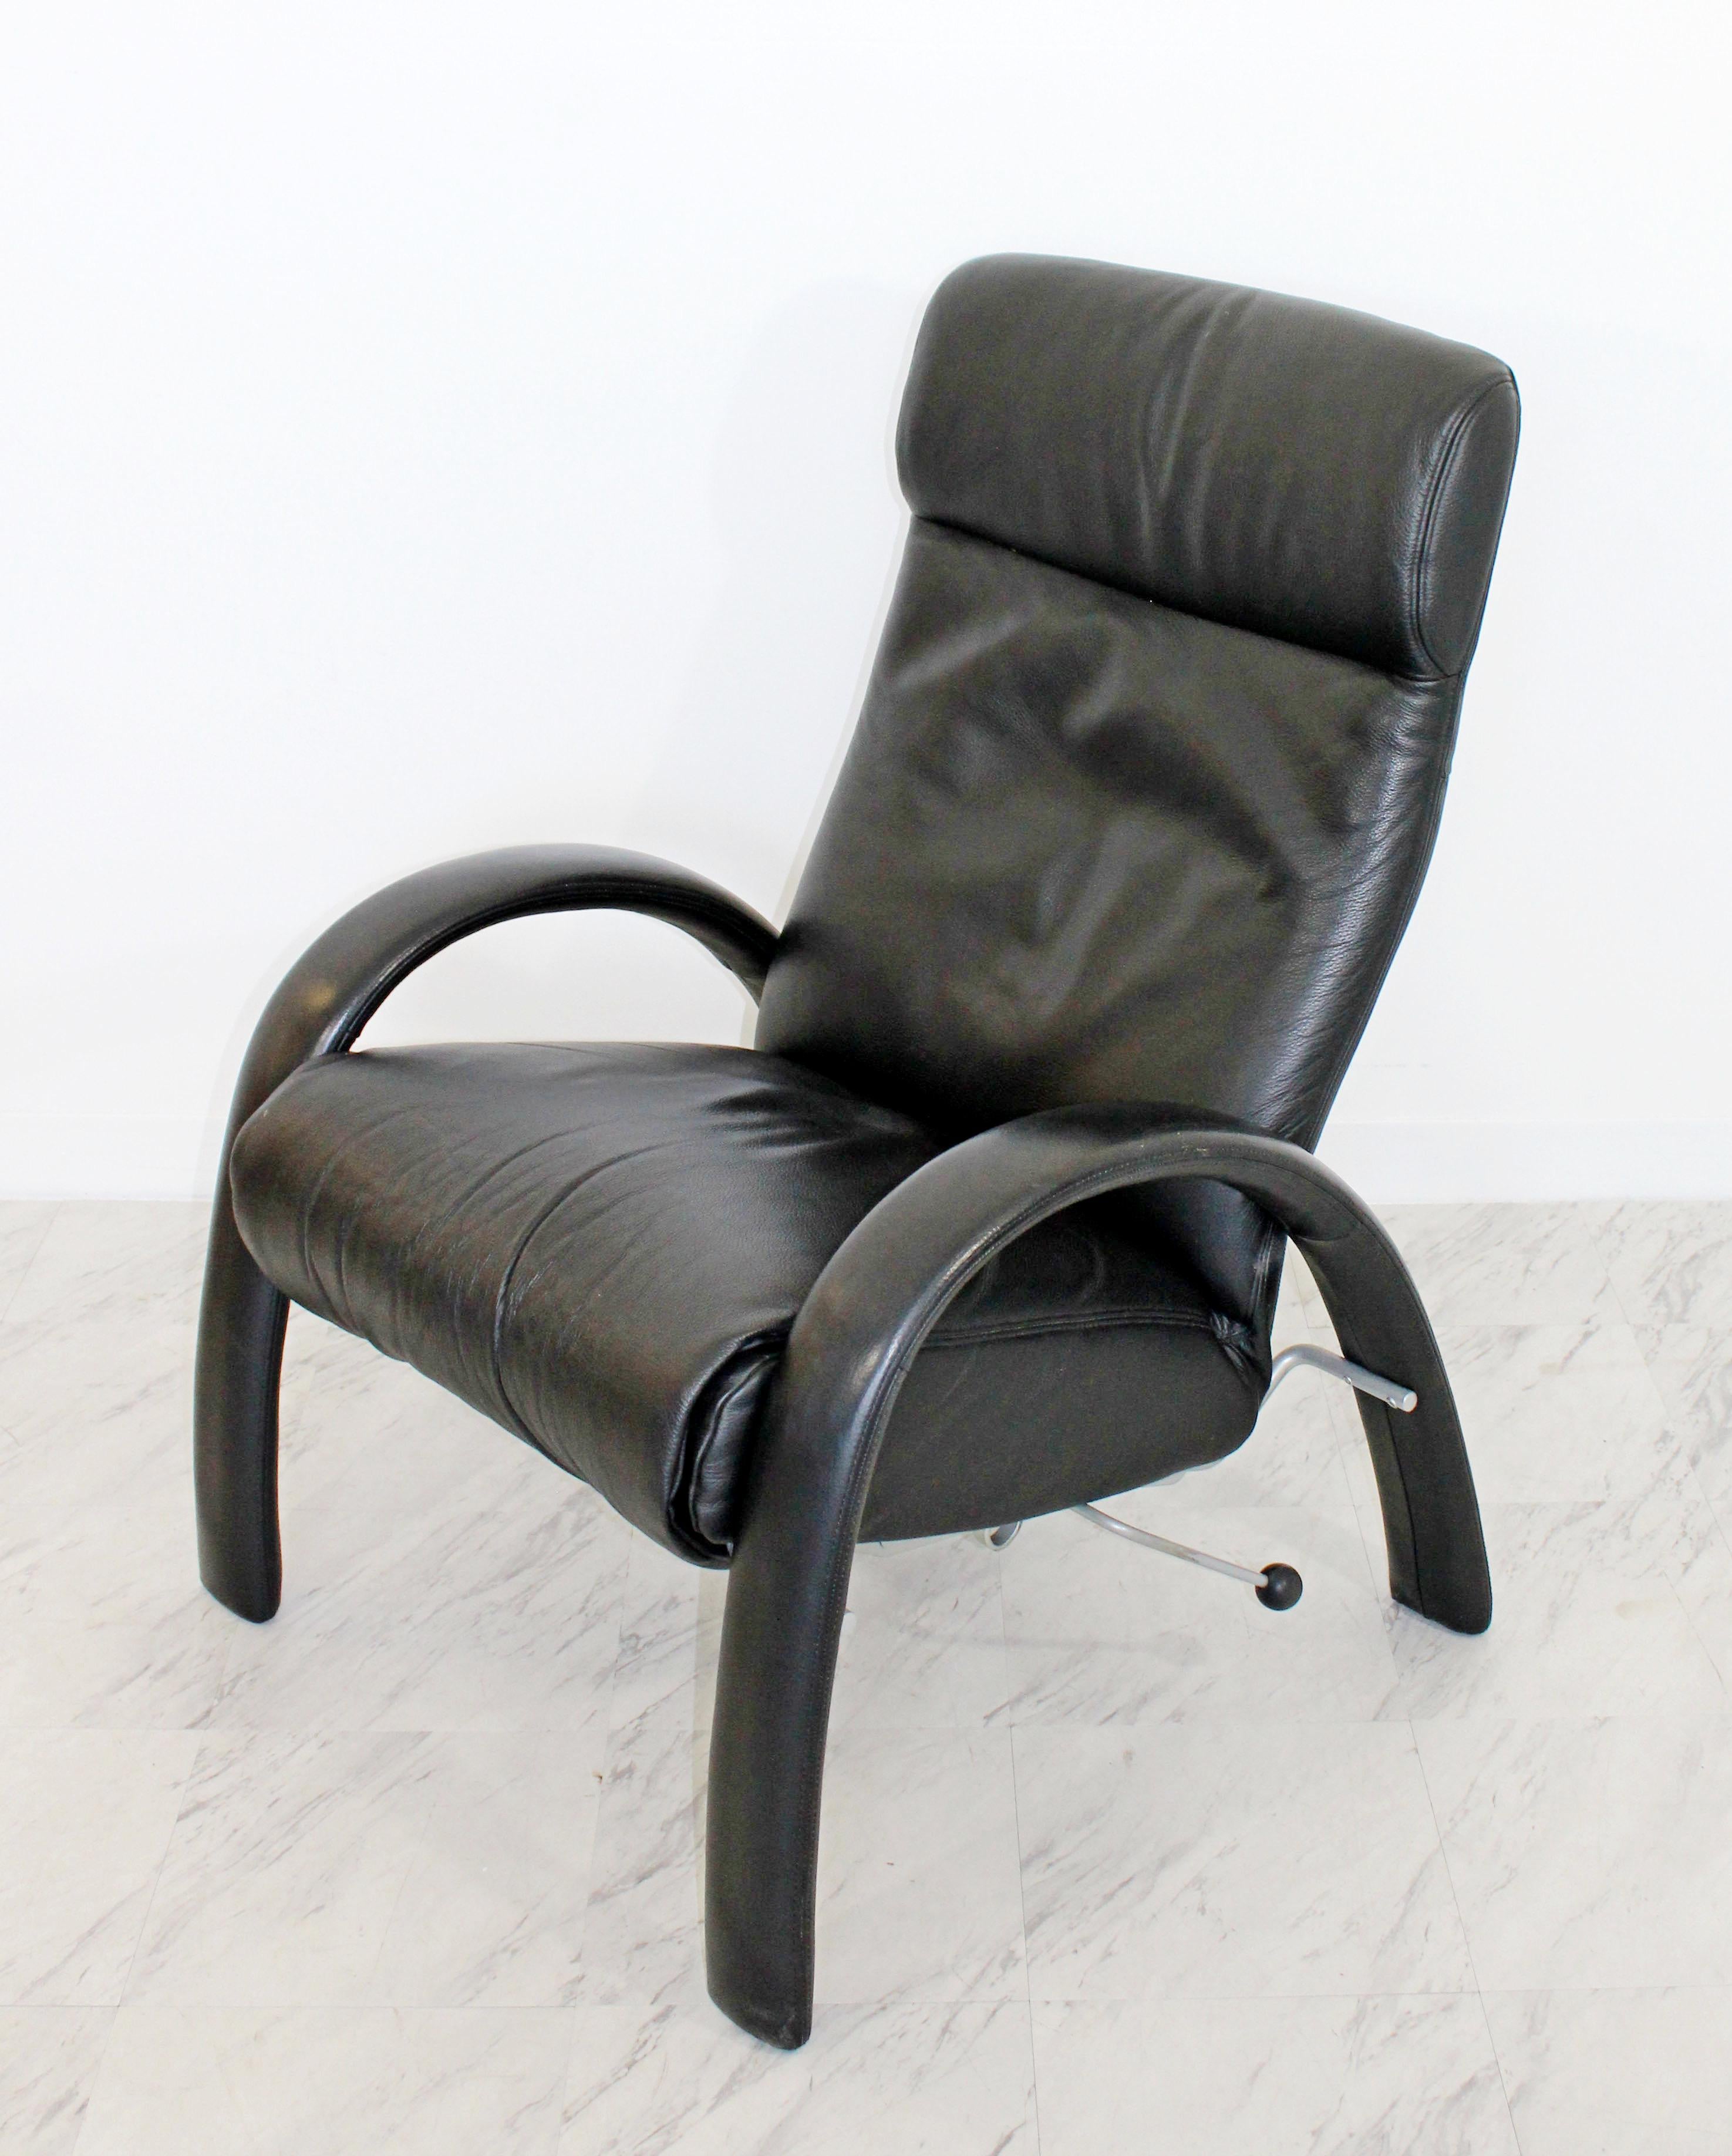 For your consideration is a wonderful Bjork black leather, reclining armchair by Lafer. The back reclines and the footrest extends separately. In excellent condition. The dimensions upright are 29